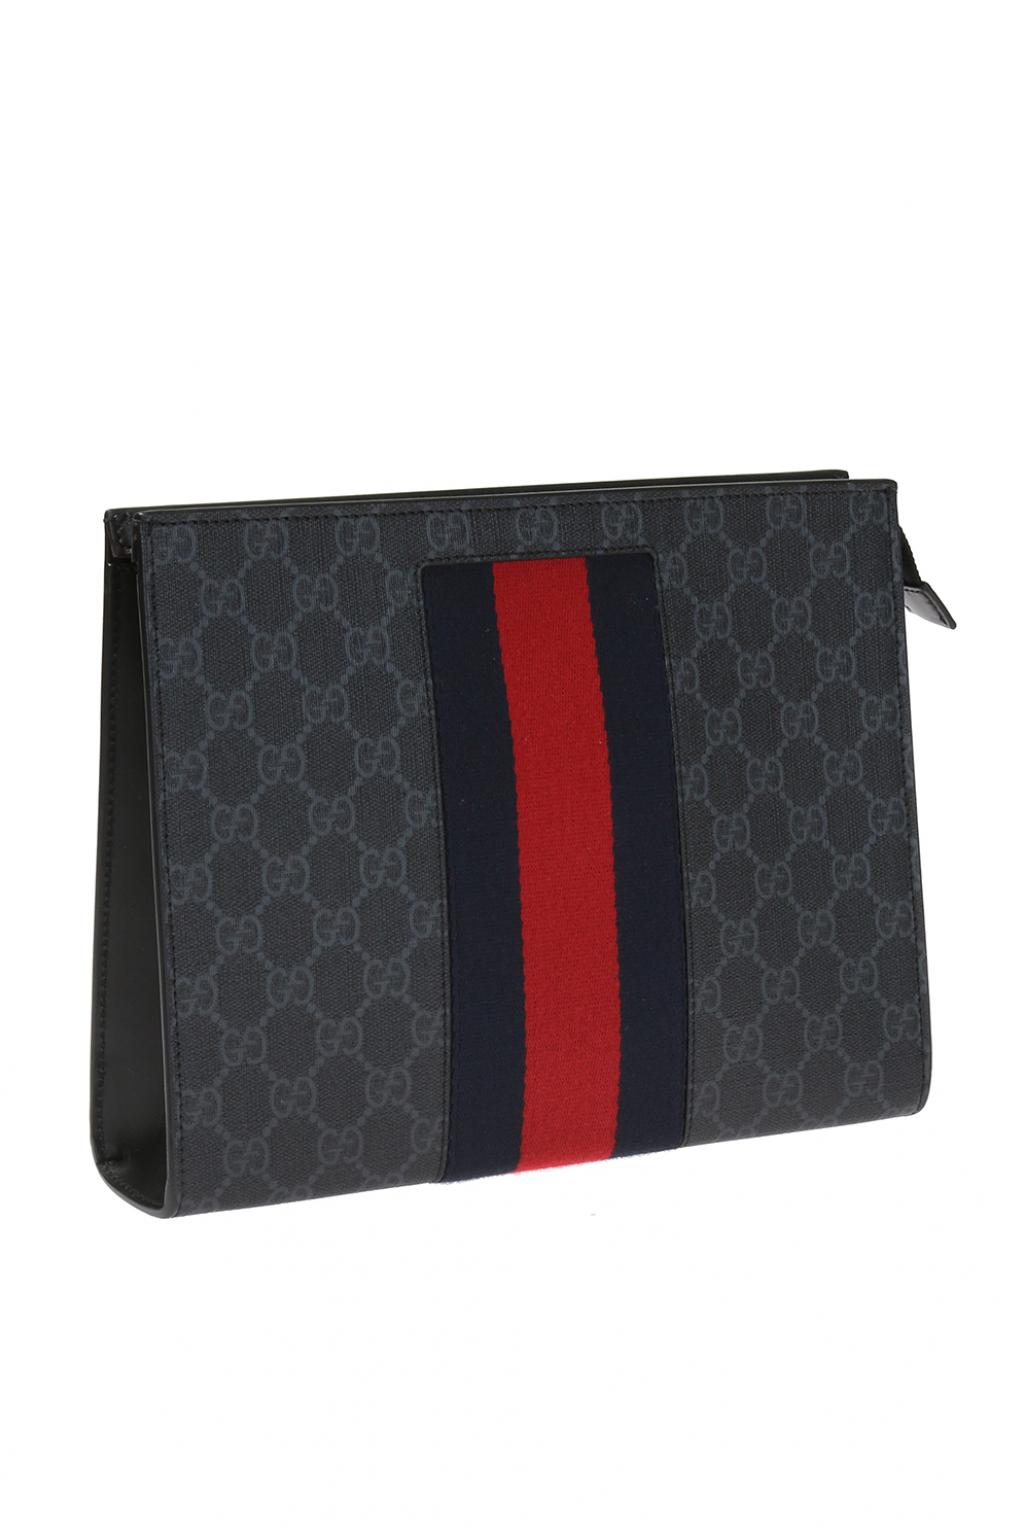 Gucci Black Cosmetic Bags